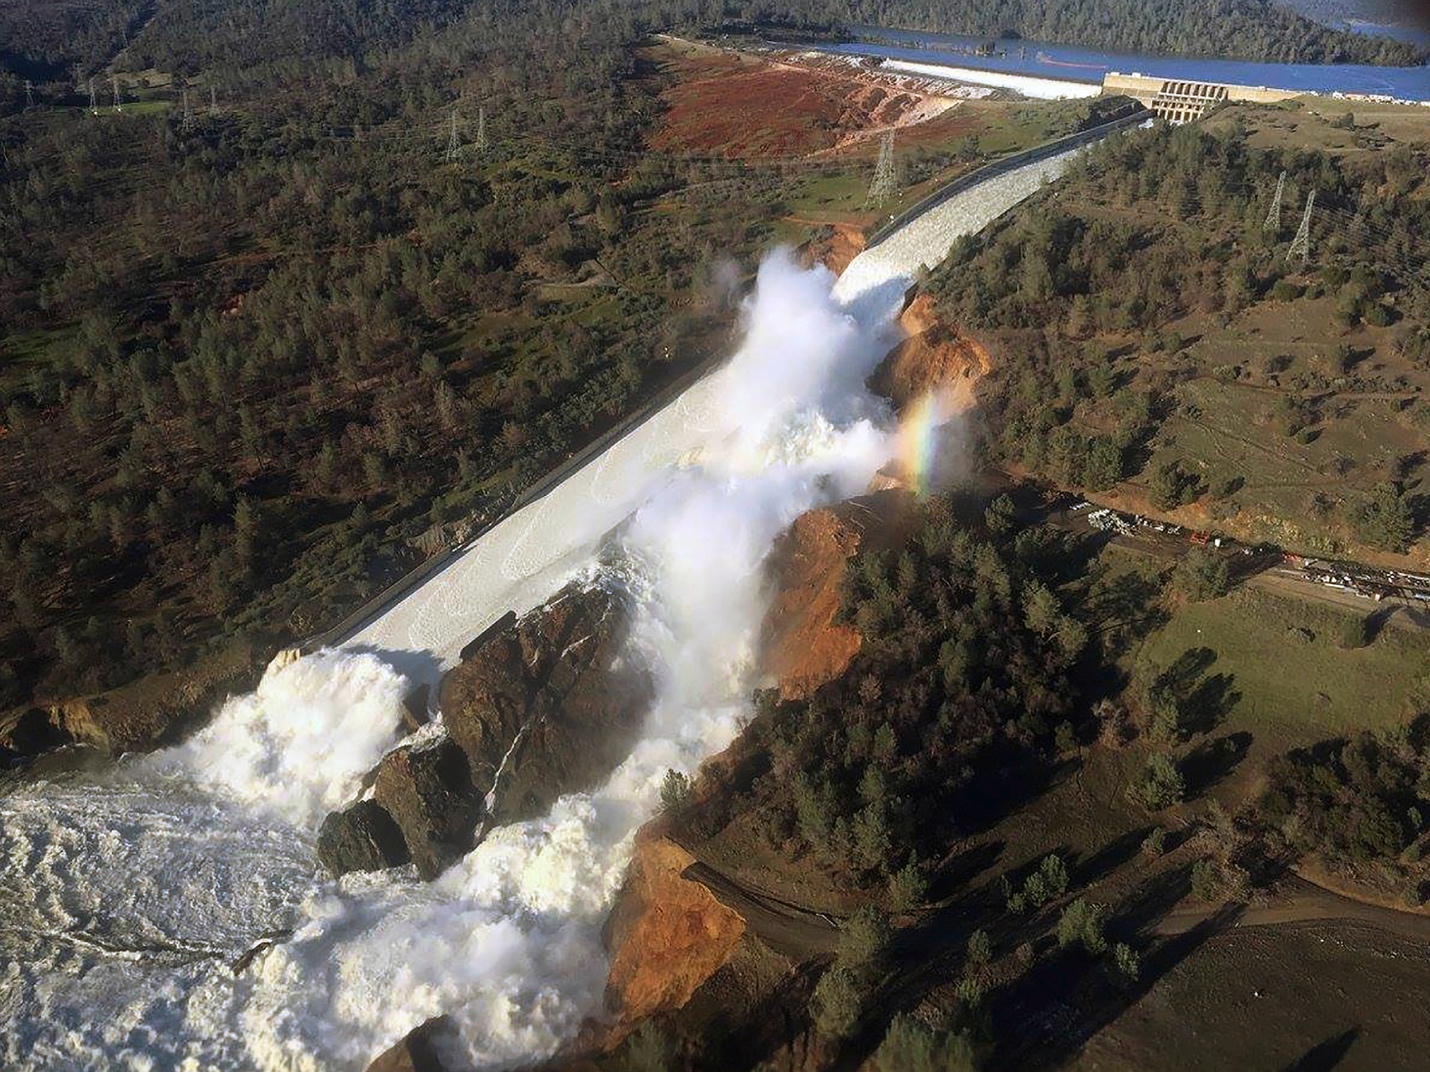 water%20rights%20images/oroville_dam_spillway_2017-02-11.jpg